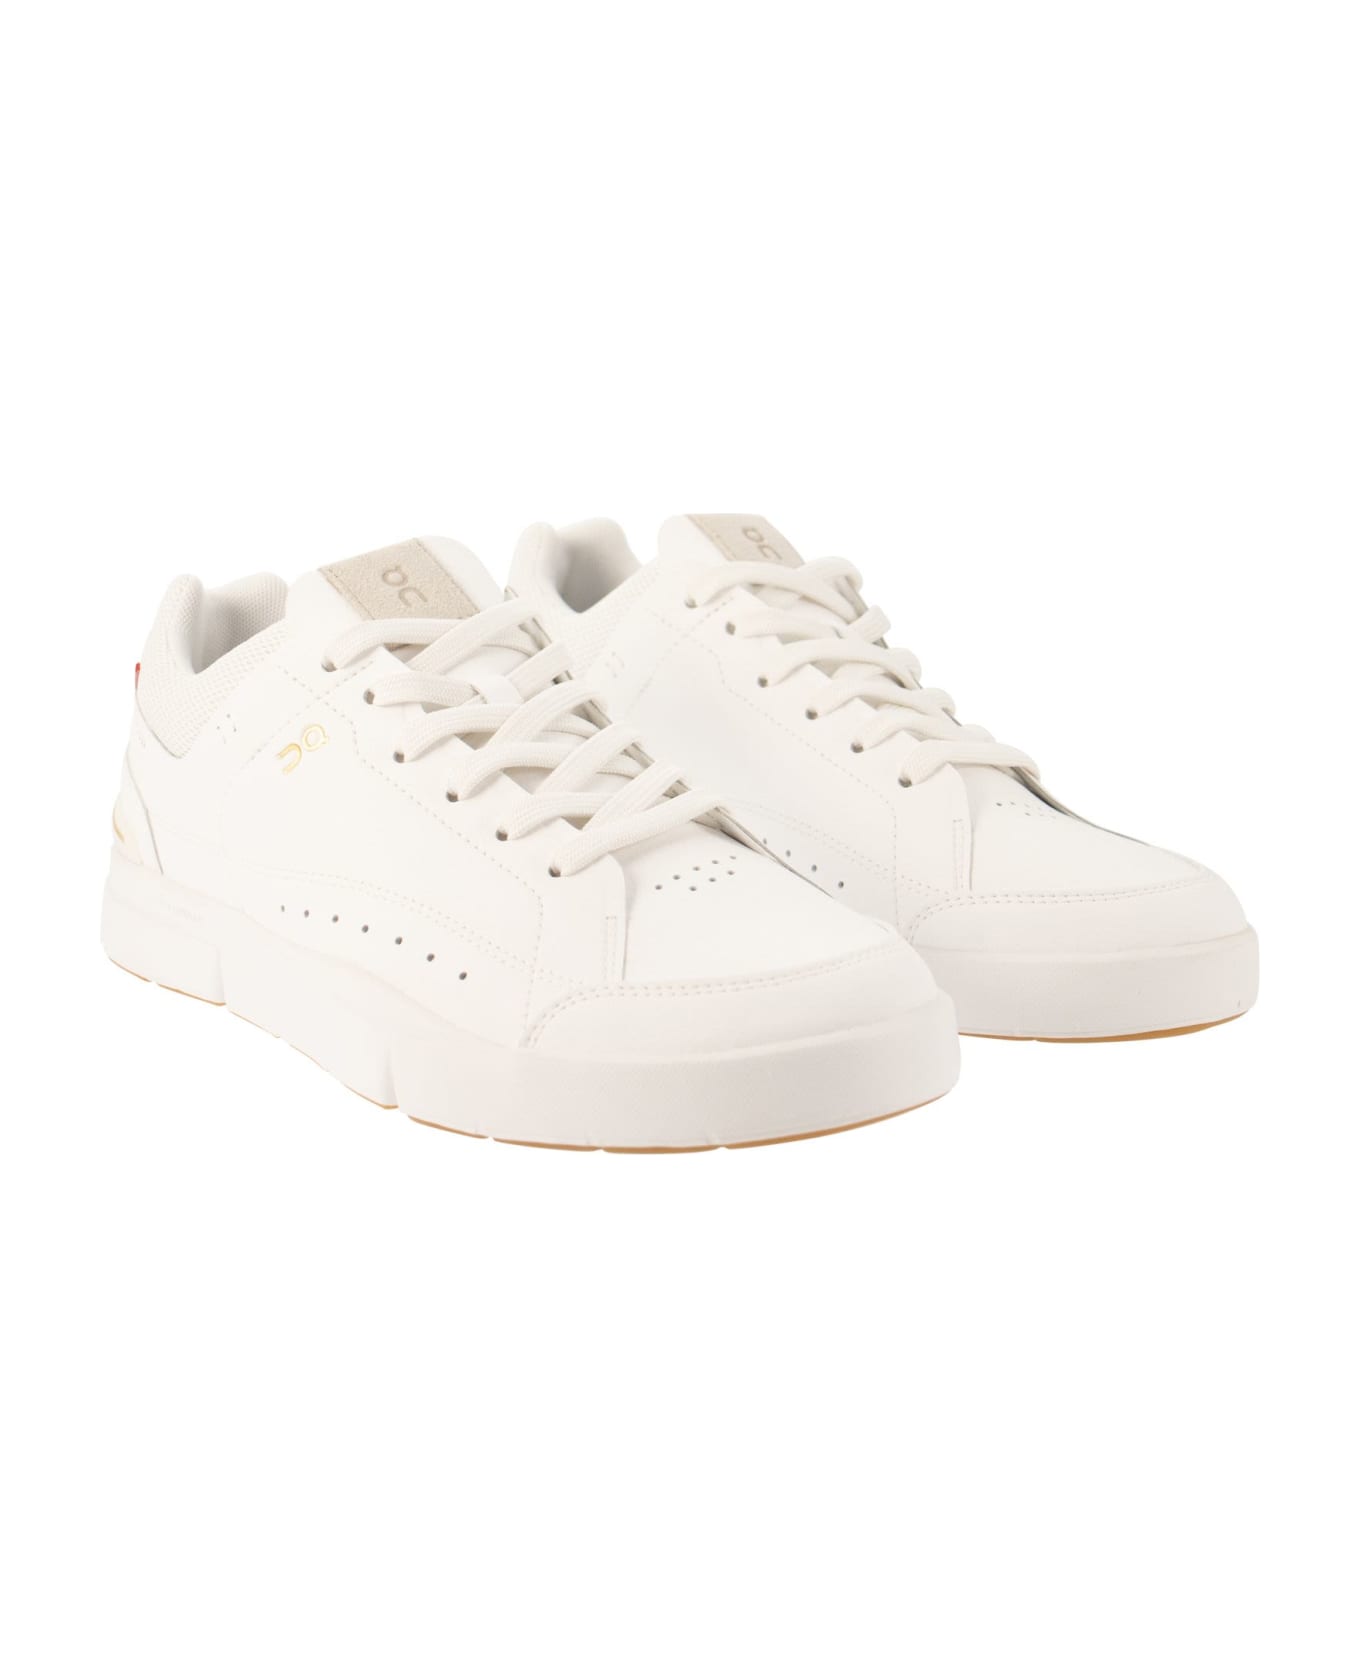 ON The Roger - Sneakers - White